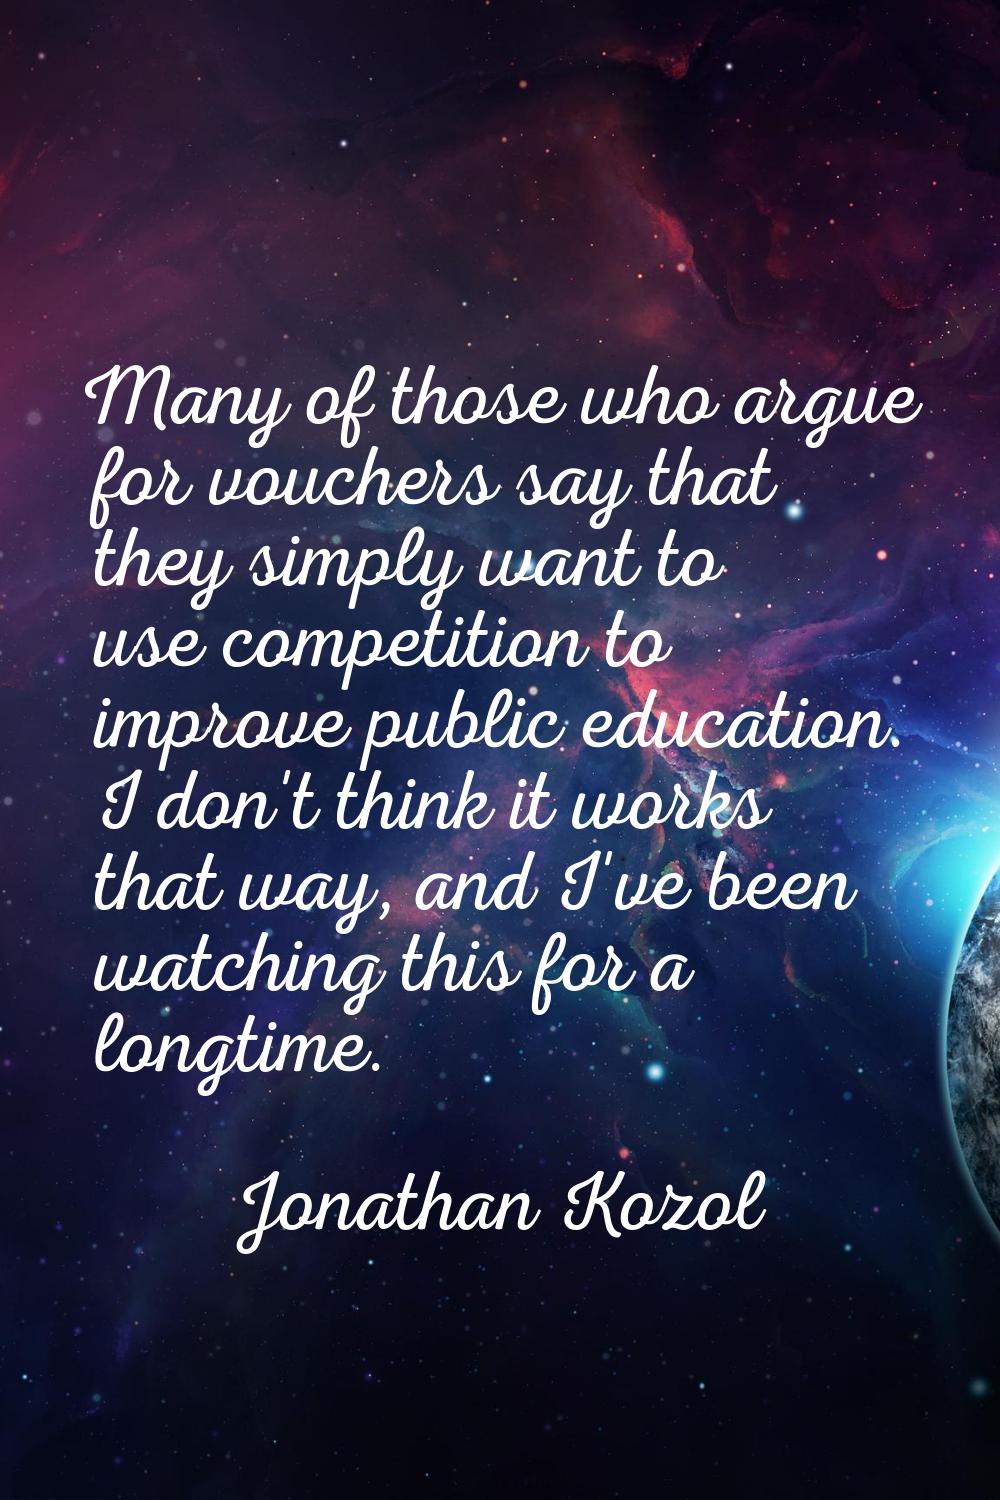 Many of those who argue for vouchers say that they simply want to use competition to improve public